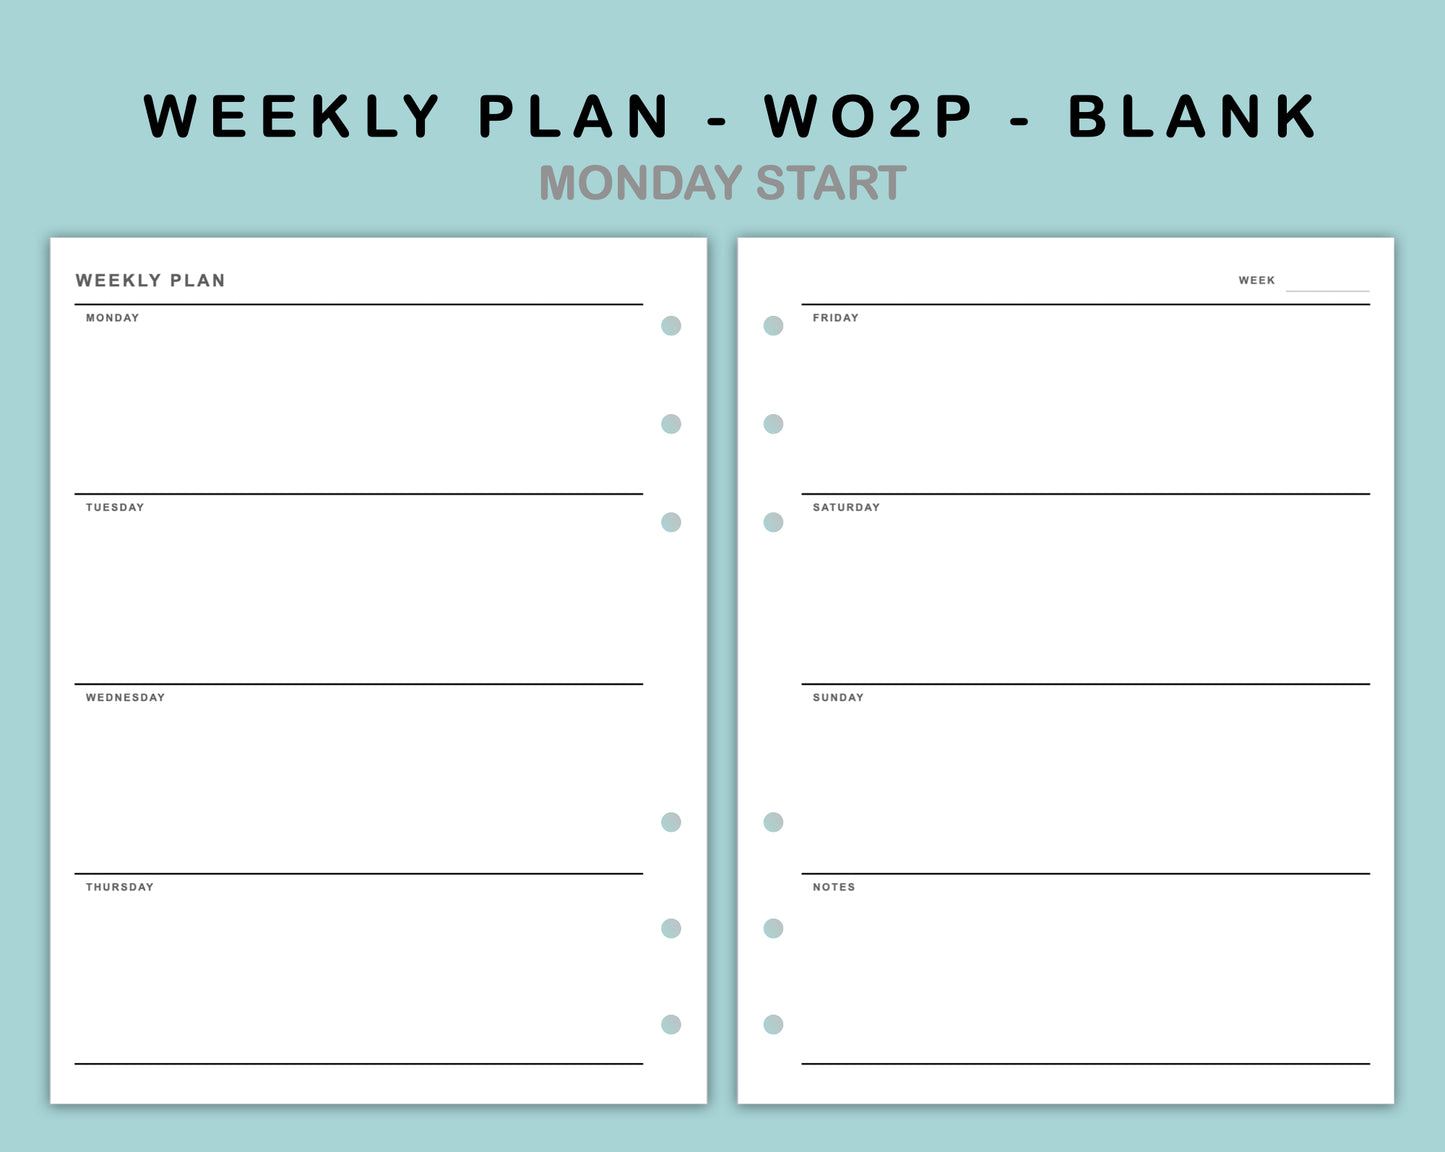 B6 Wide Inserts - Weekly Plan - WO2P - Blank